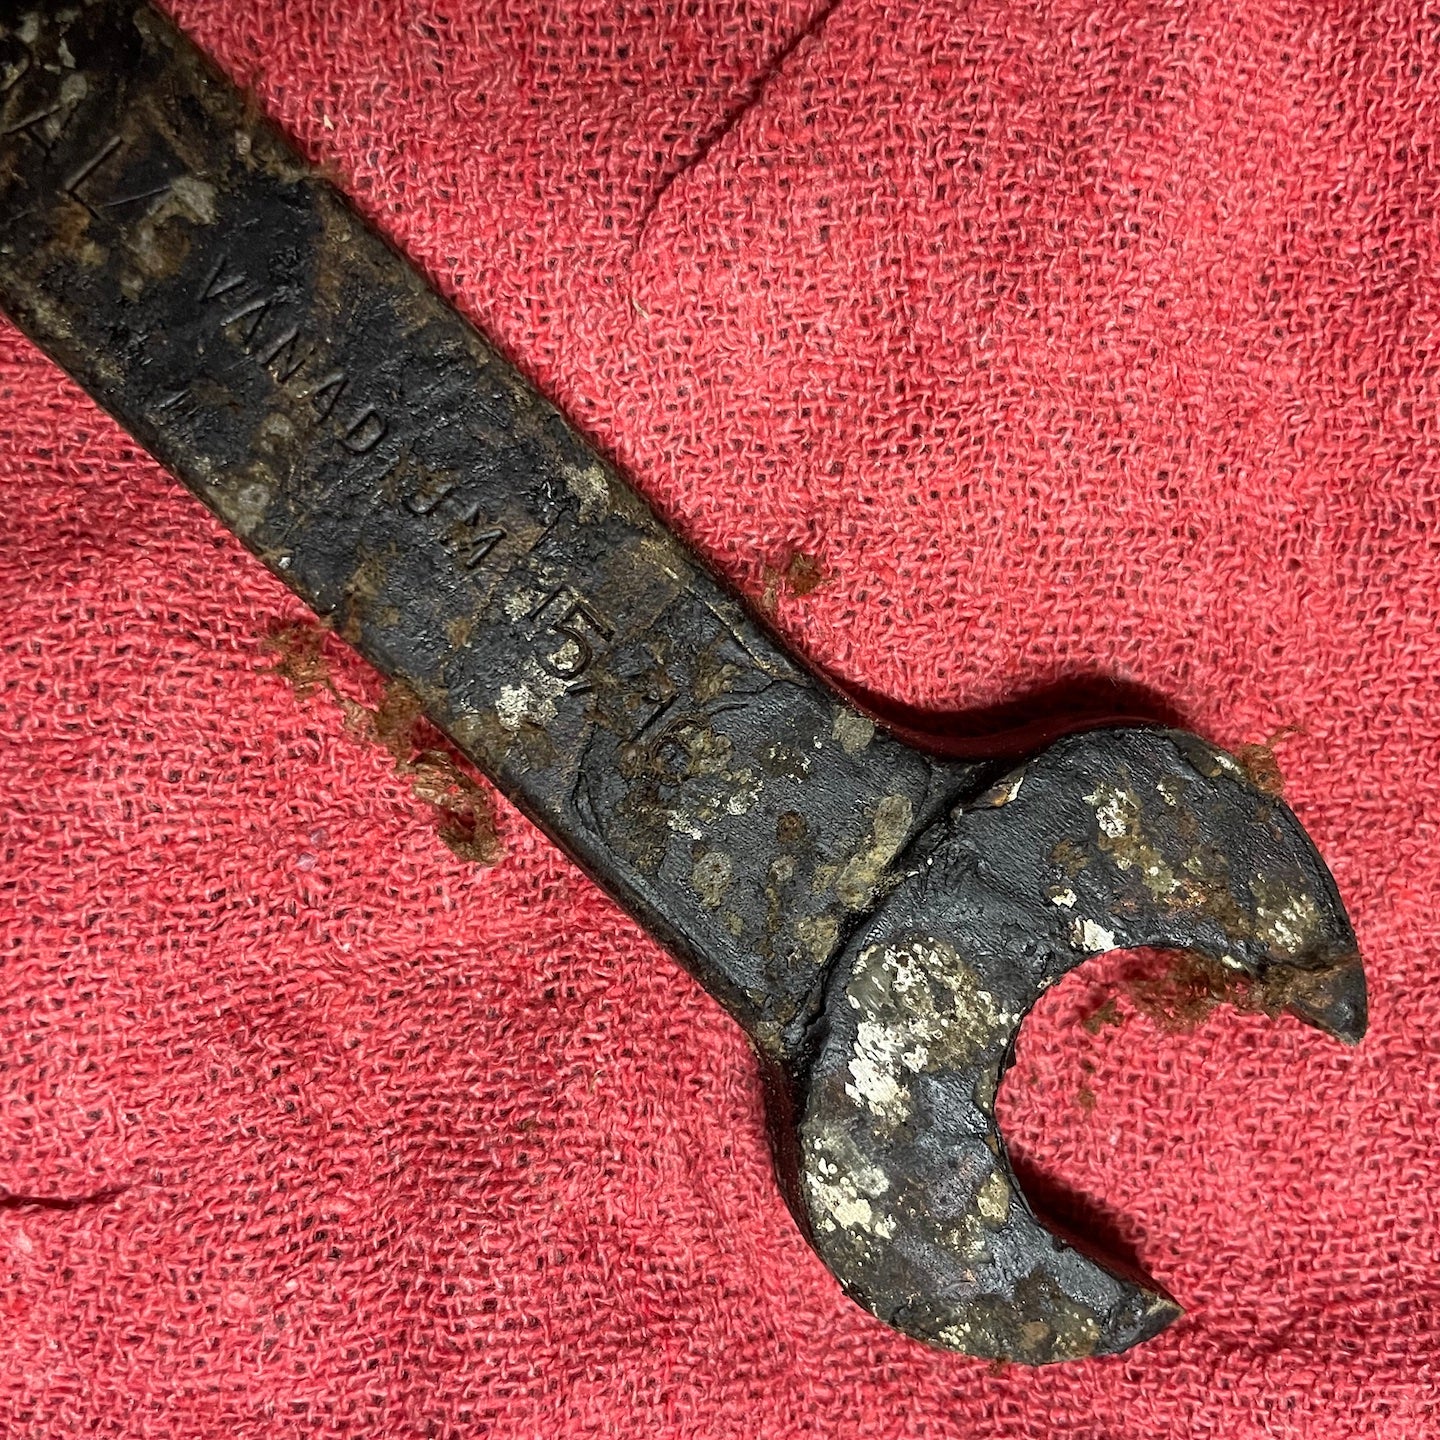 Hinsdale NOS WWII Era Open End 1" x 15/16" Wrench